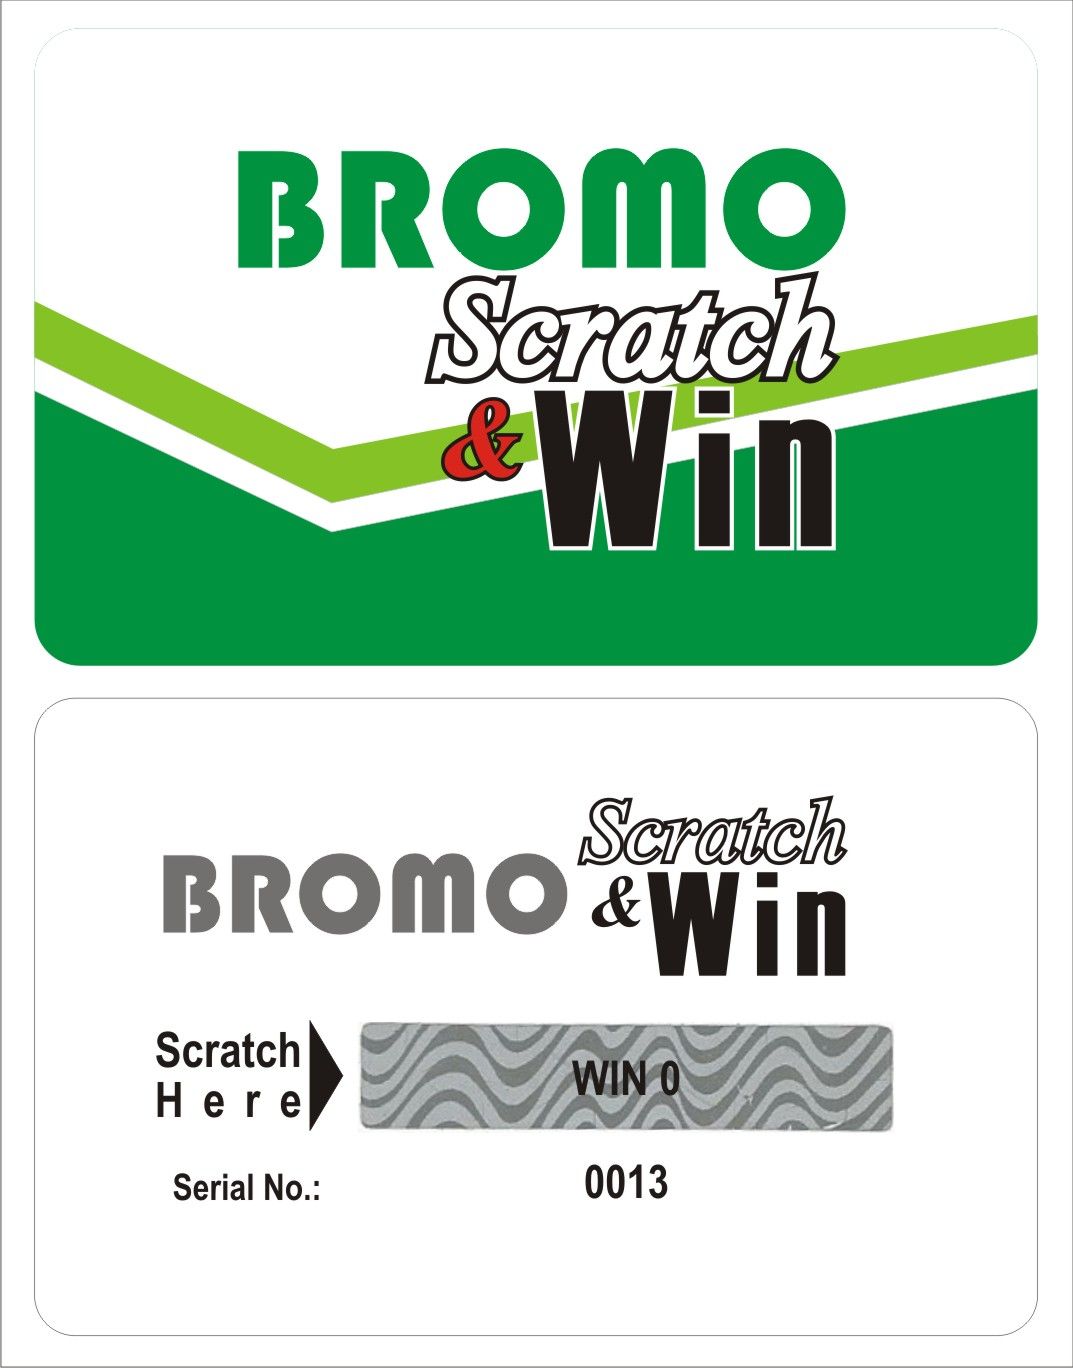 PROMO SCRATCH CARDS PRINTING CALL EMMANUEL ON 08176499649